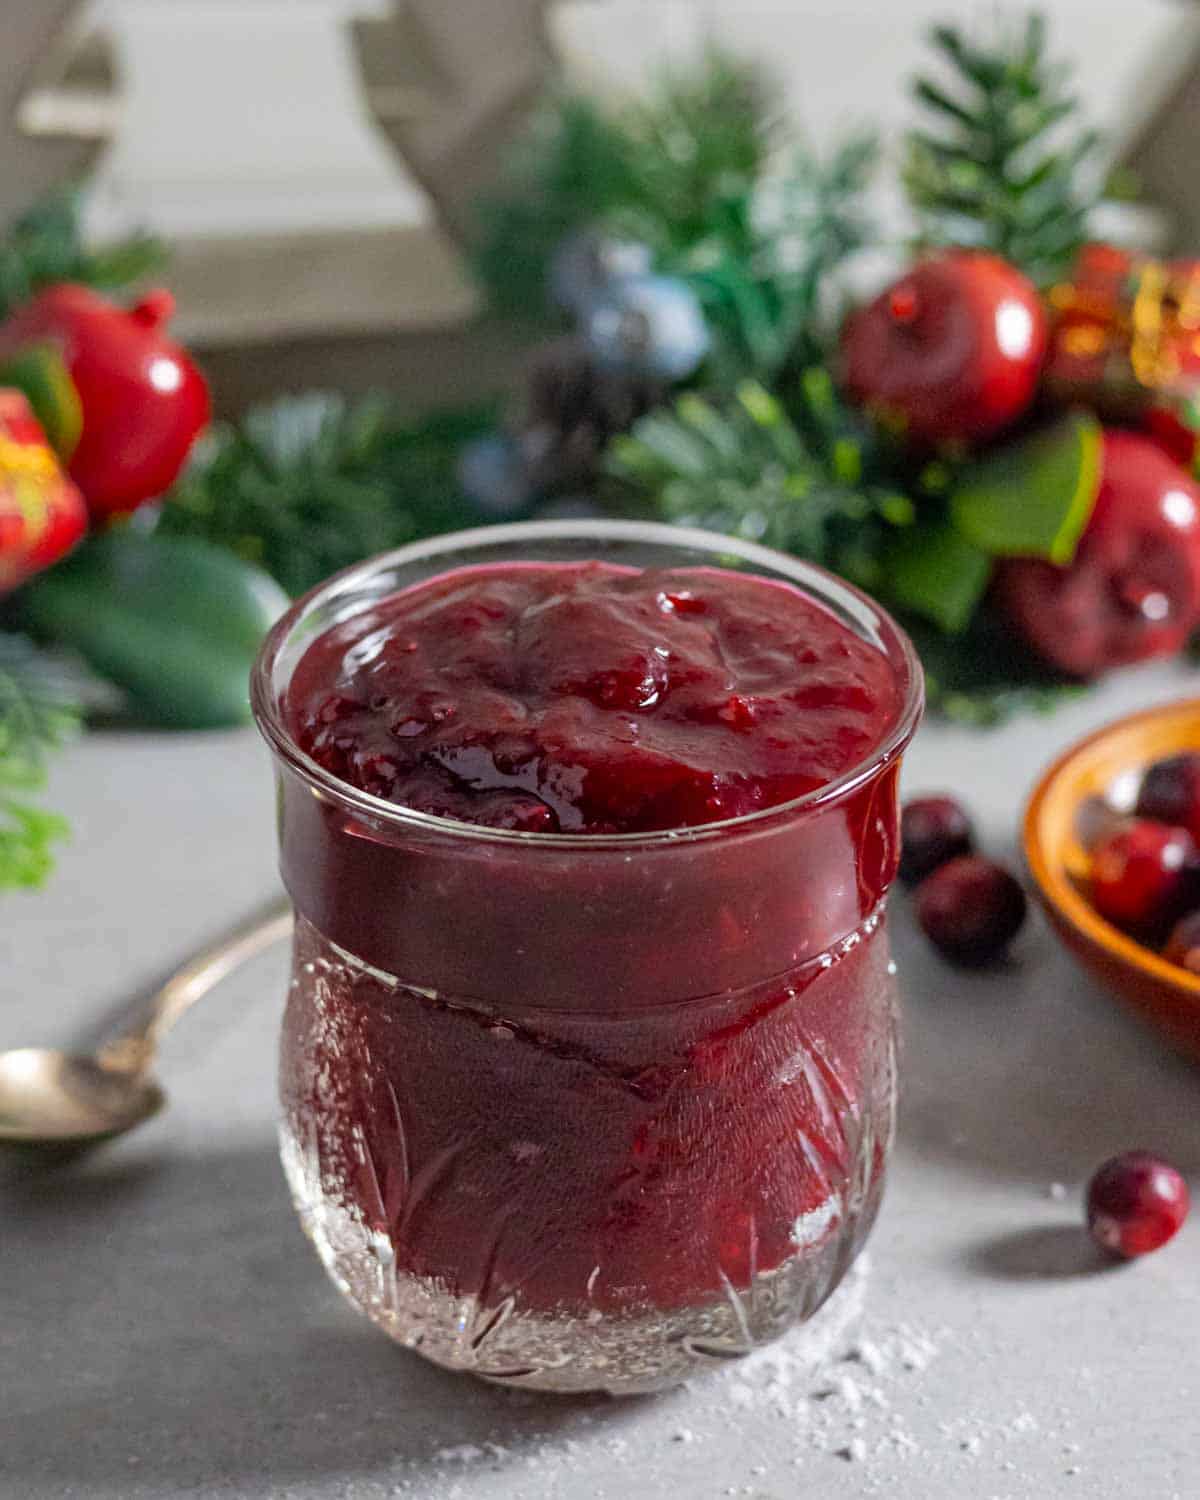 Sugar-free jam made with cranberries in a decorative serving jar.